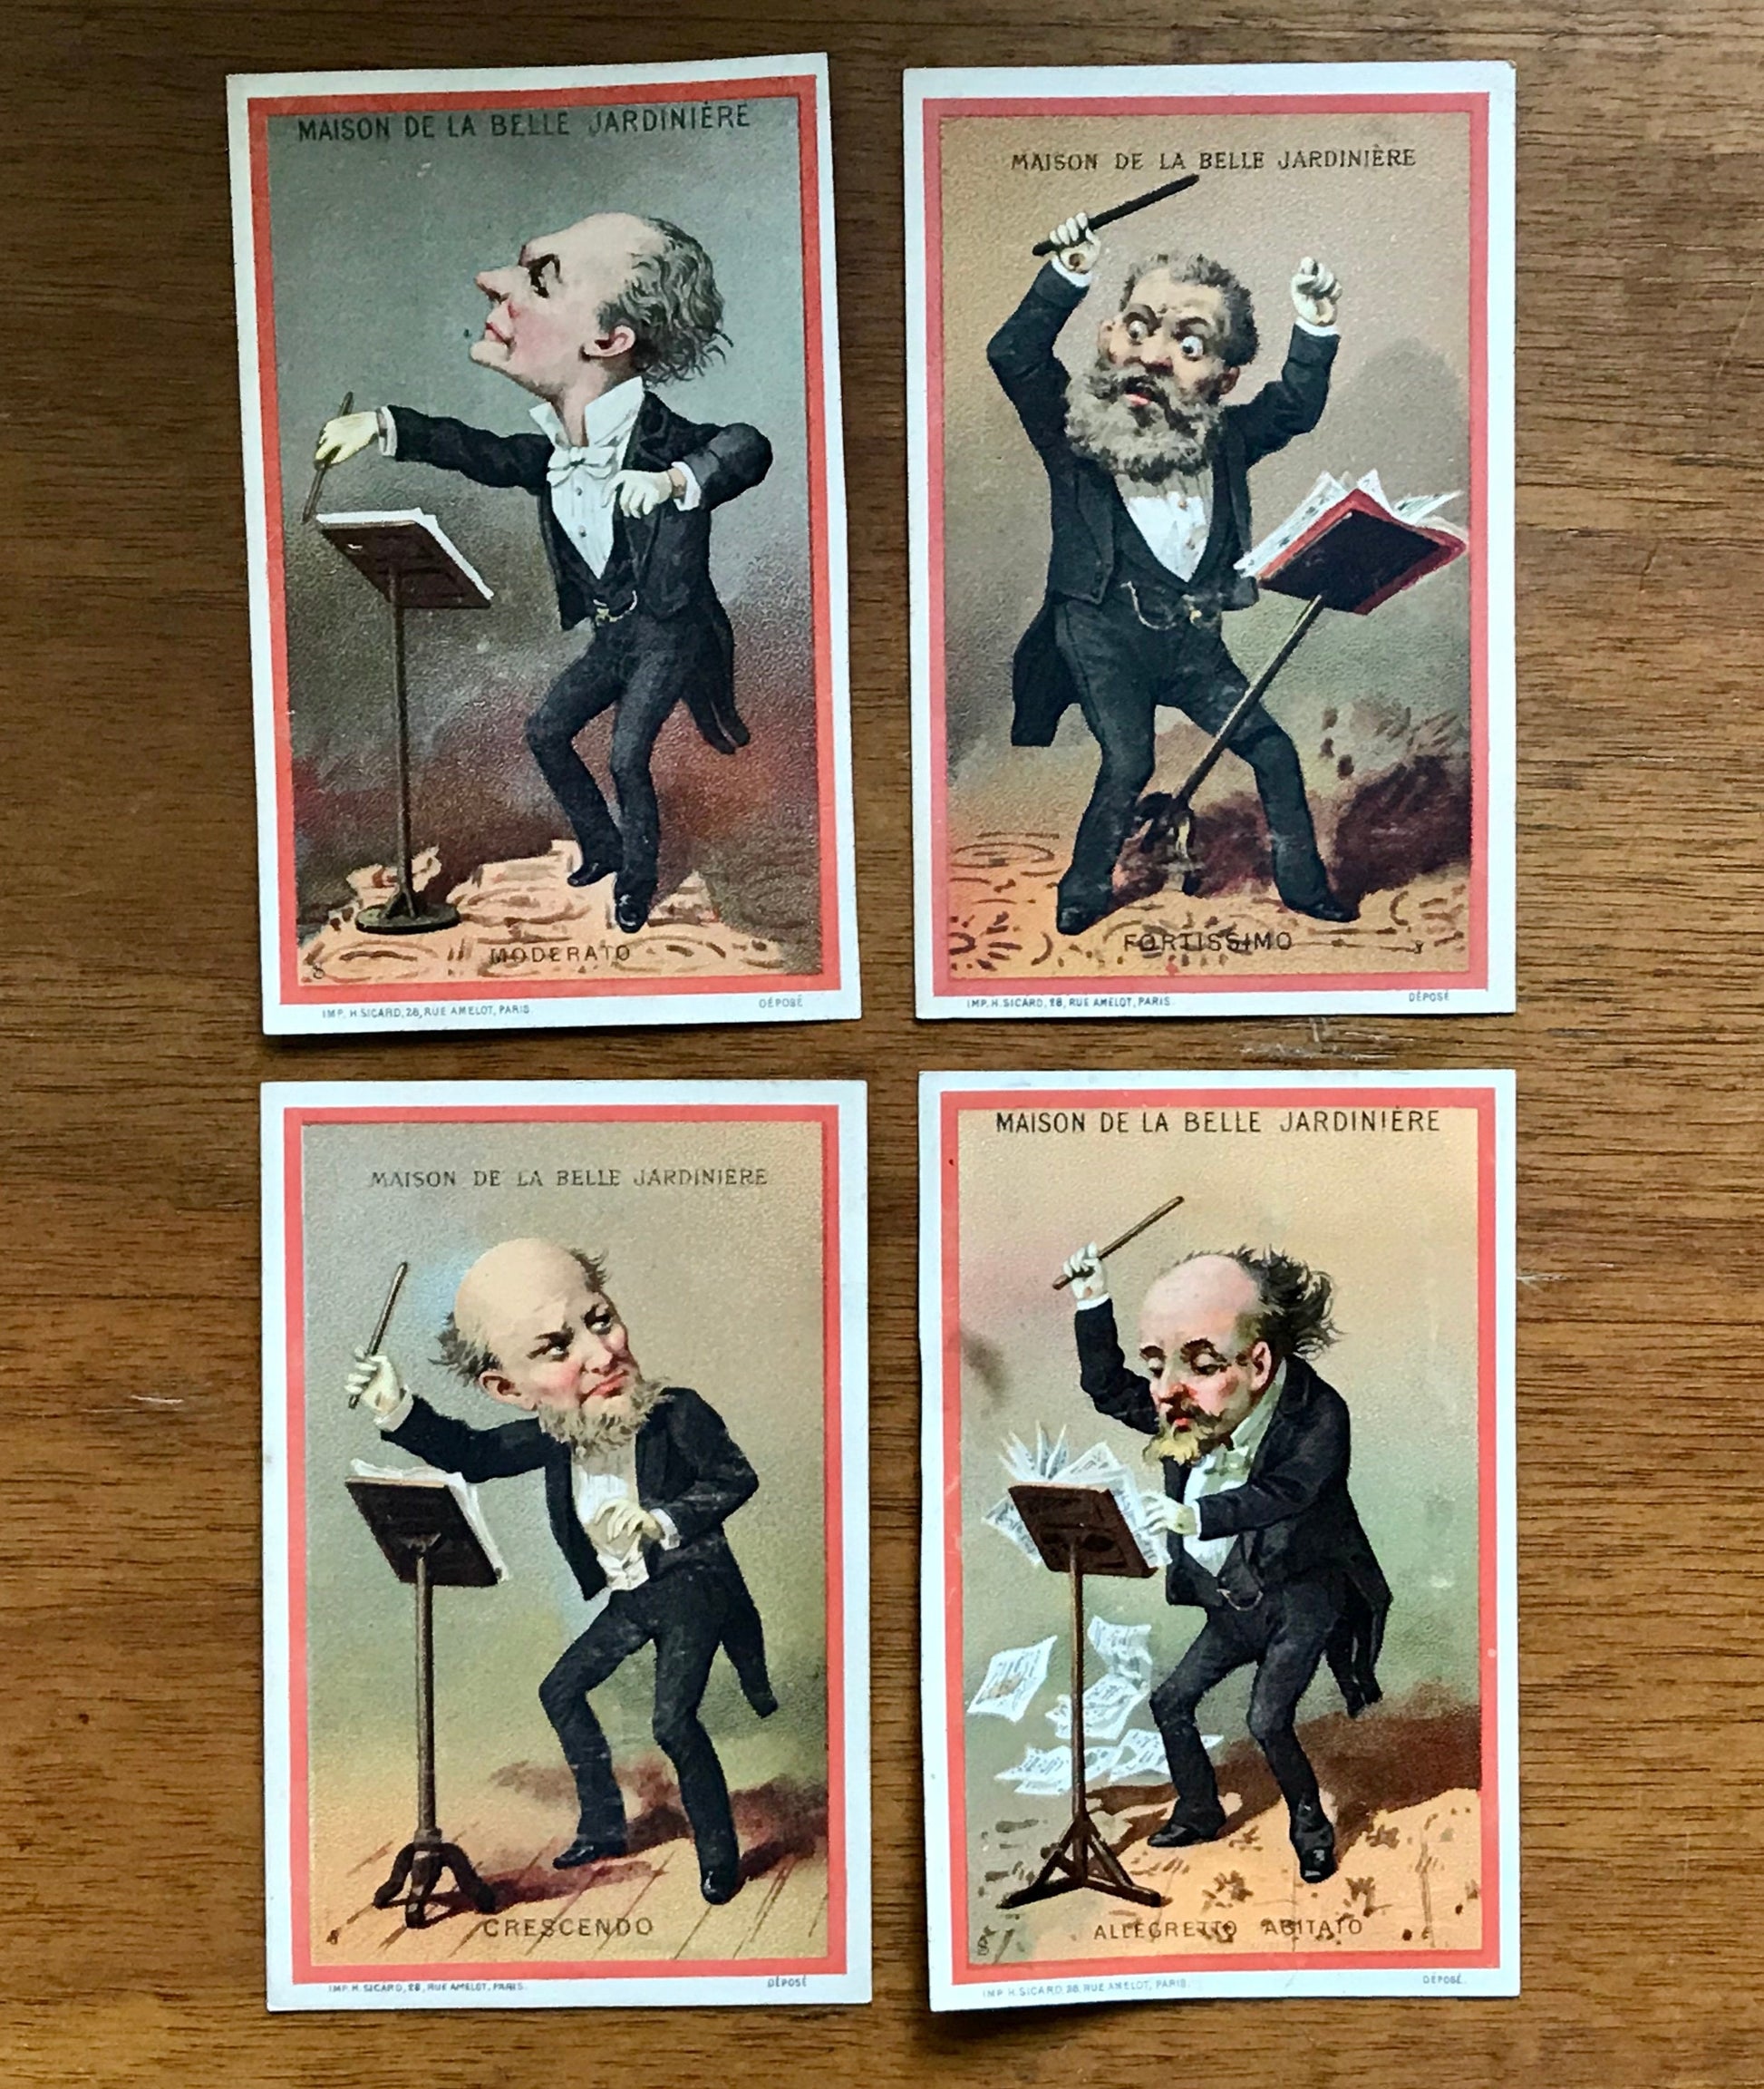 A Set of 8 French Trade Cards. Featuring conductors illustrating the mood of the music played. Dated 1878. Size: 12 x 8 cms.